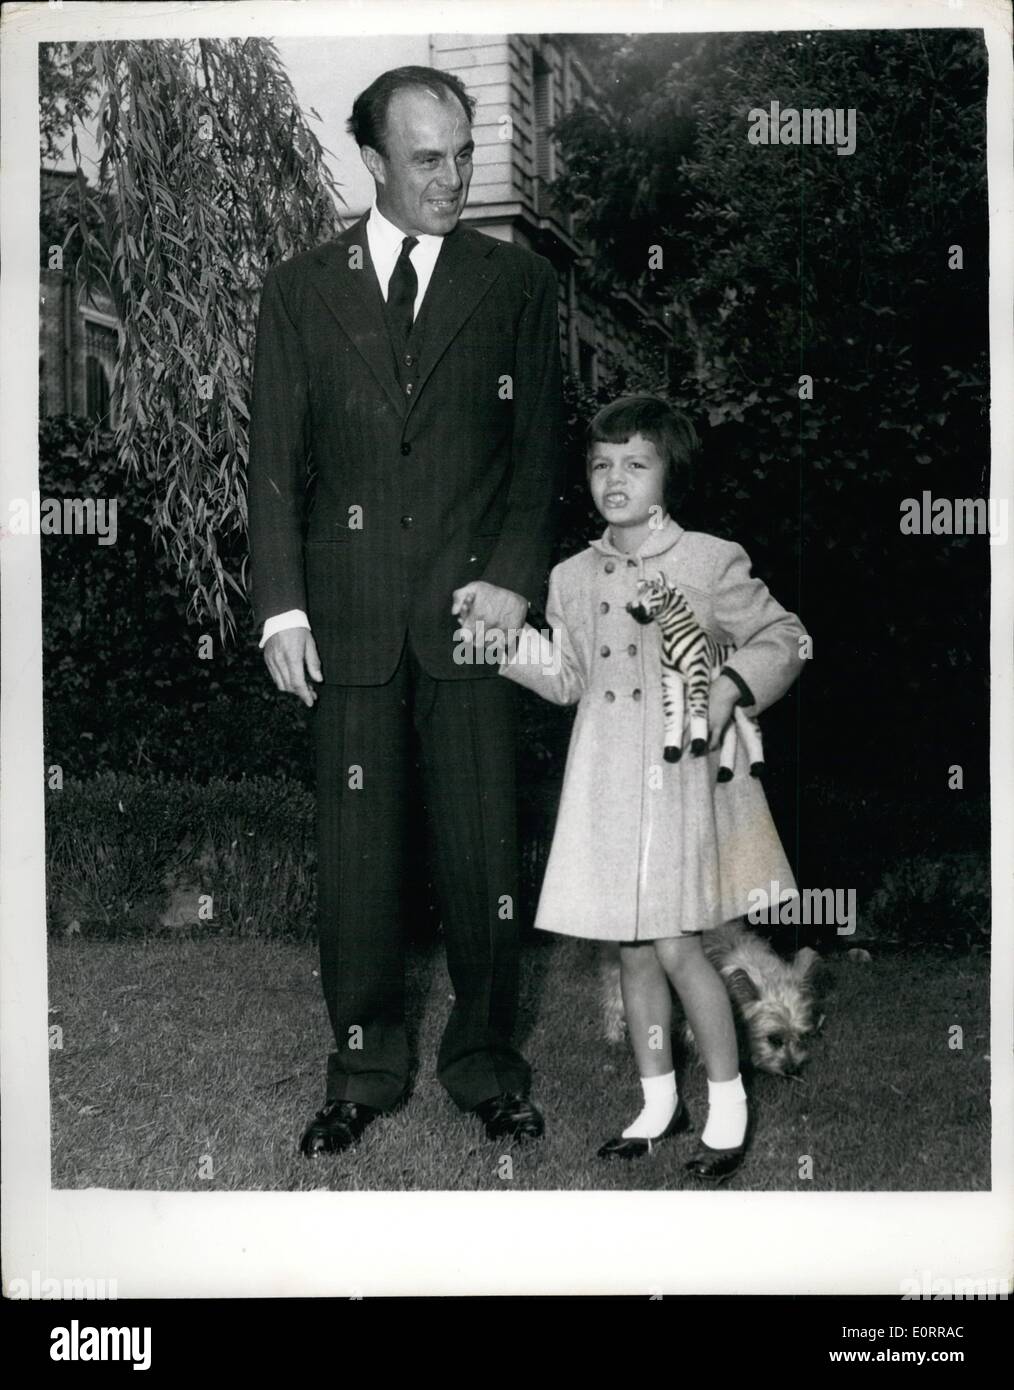 May 05, 1960 - Prince Aly Khan and Daughter Yasmin: Photo shows Prince Aly Khan, pictured with his little Daughter yasmin, in the garden of his house in Neuilly, paris yesterday. Stock Photo